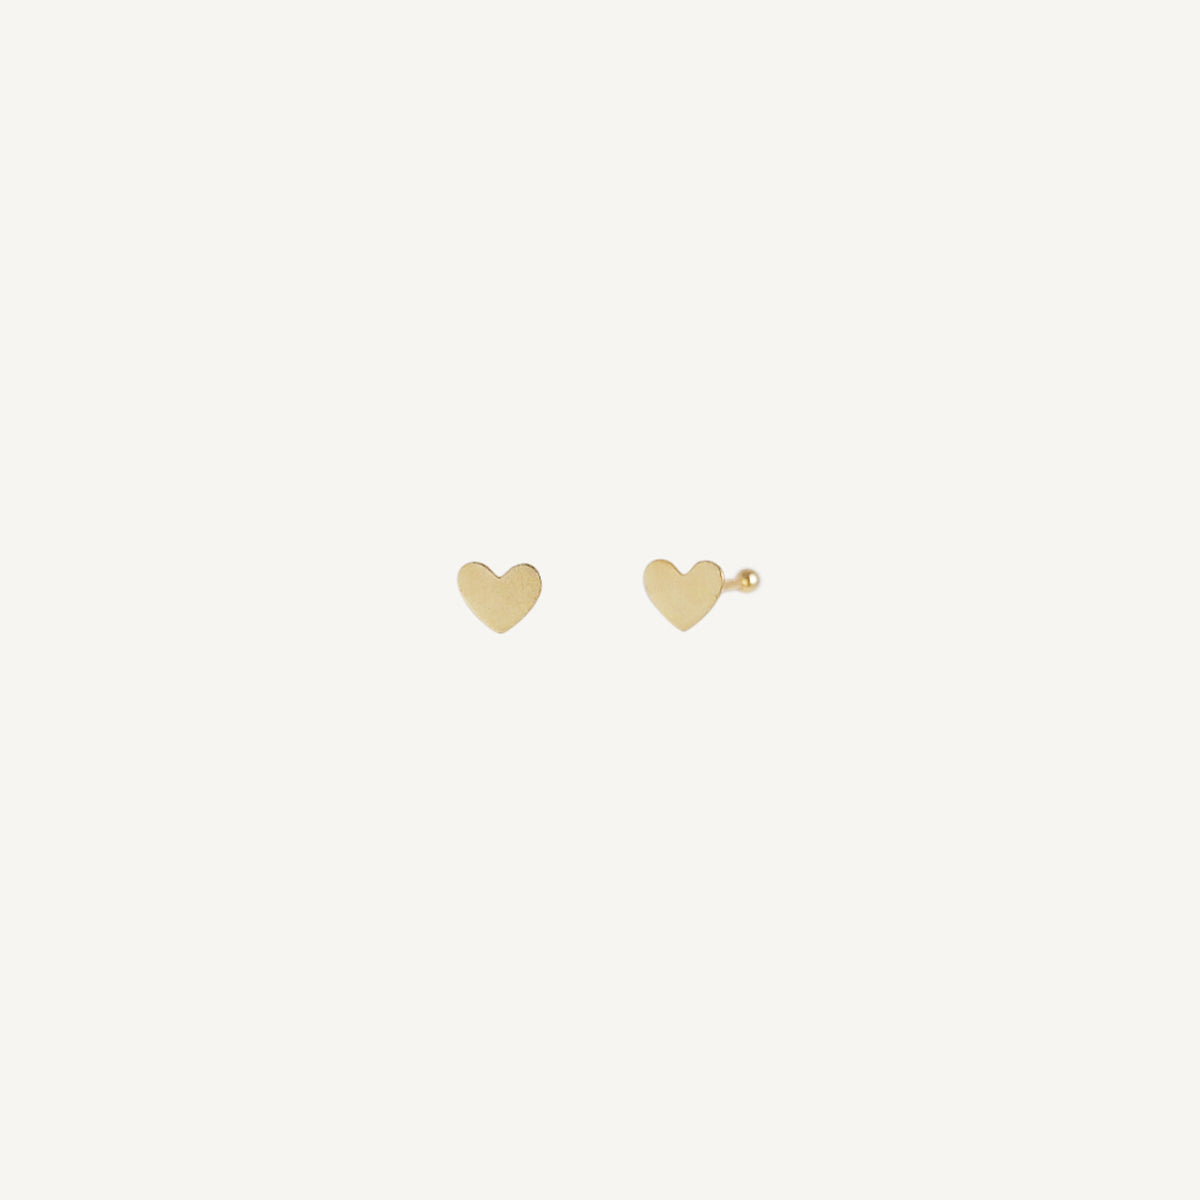 The Happy Heart Easy Studs in Solid Gold